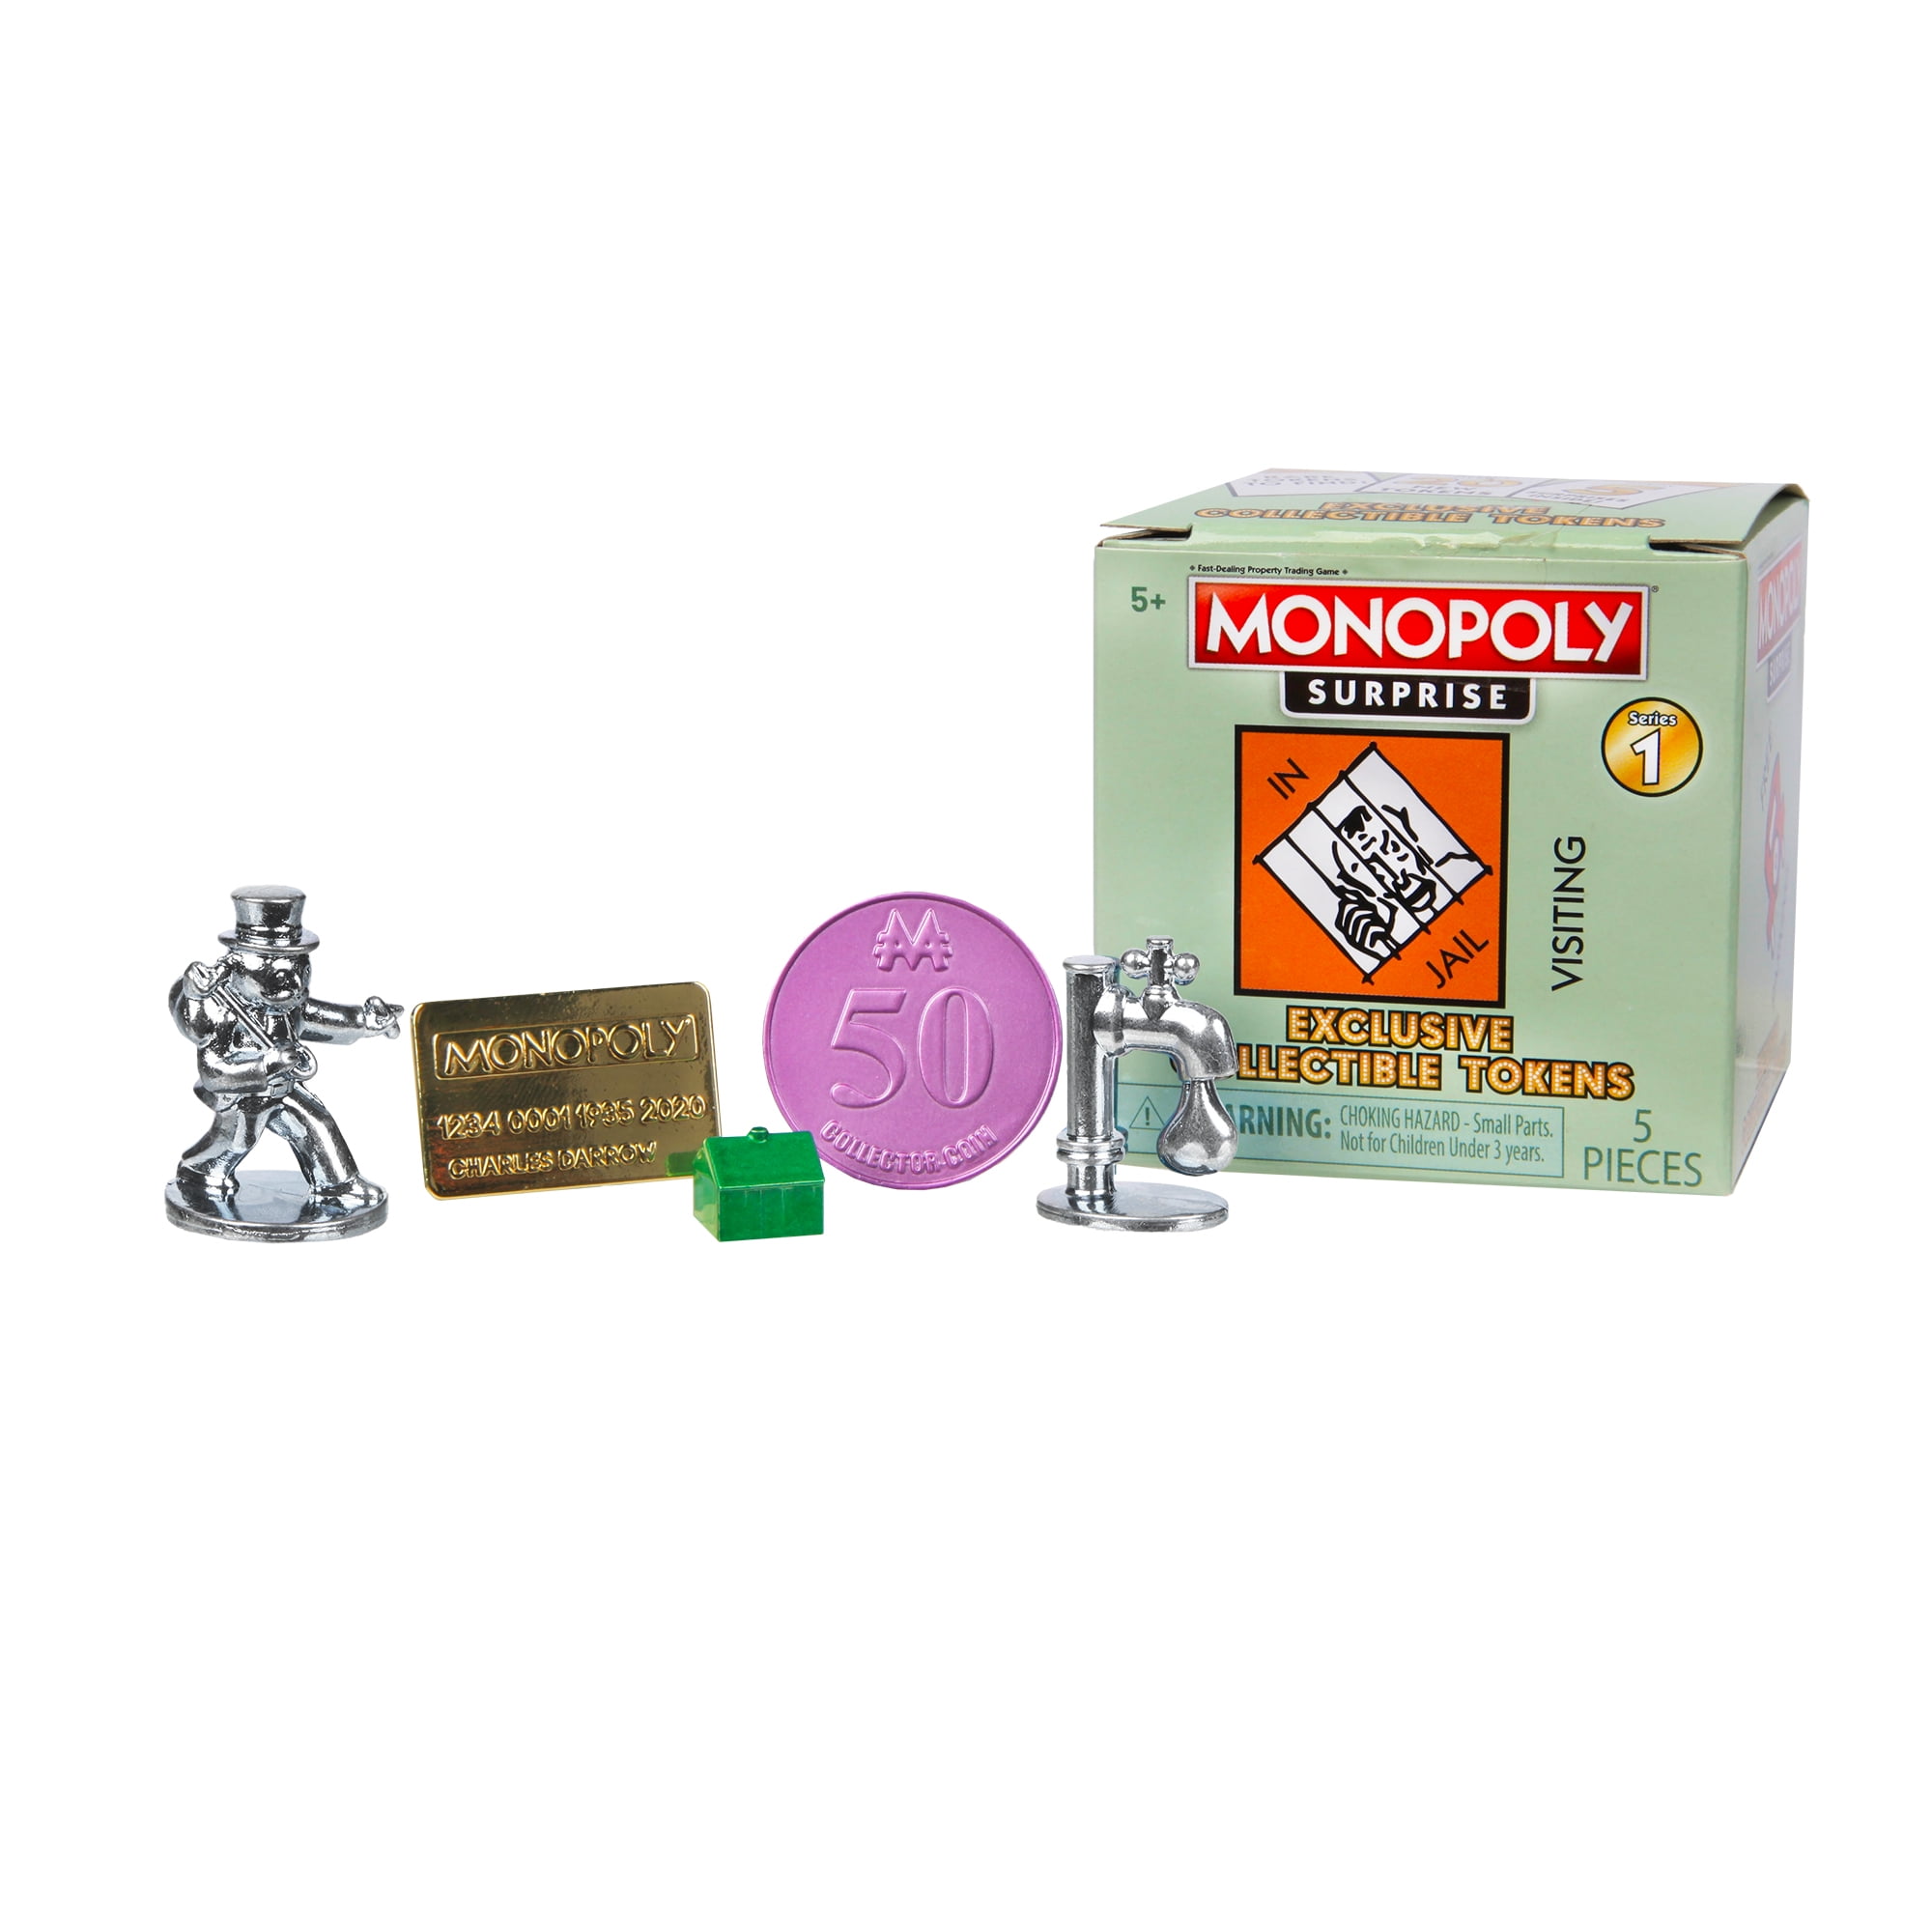 Loose Monopoly In Jail Token Monopoly Surprise Collectible Tokens Mr 